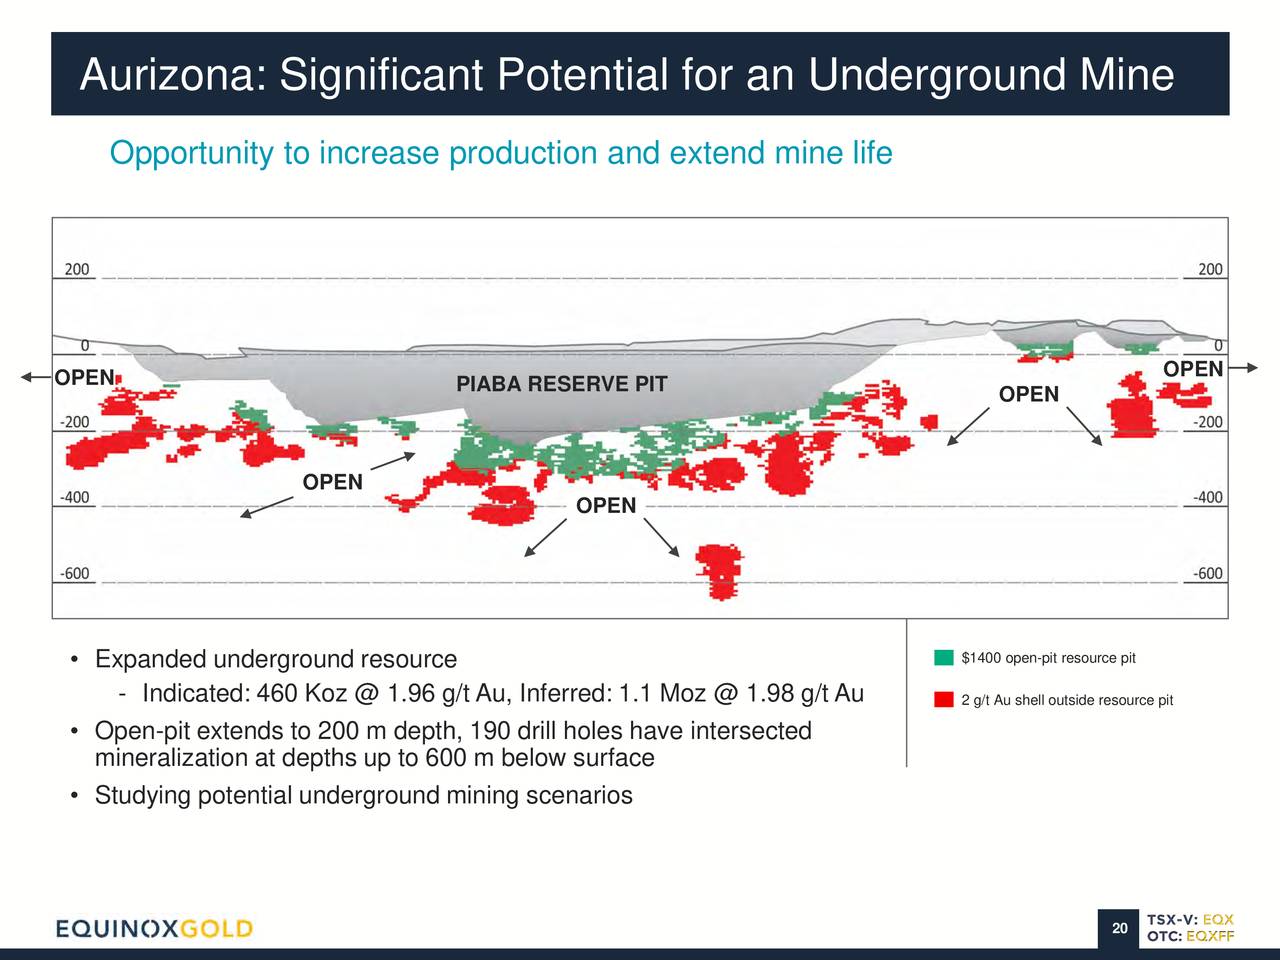 Aurizona: Significant Potential for an Underground Mine